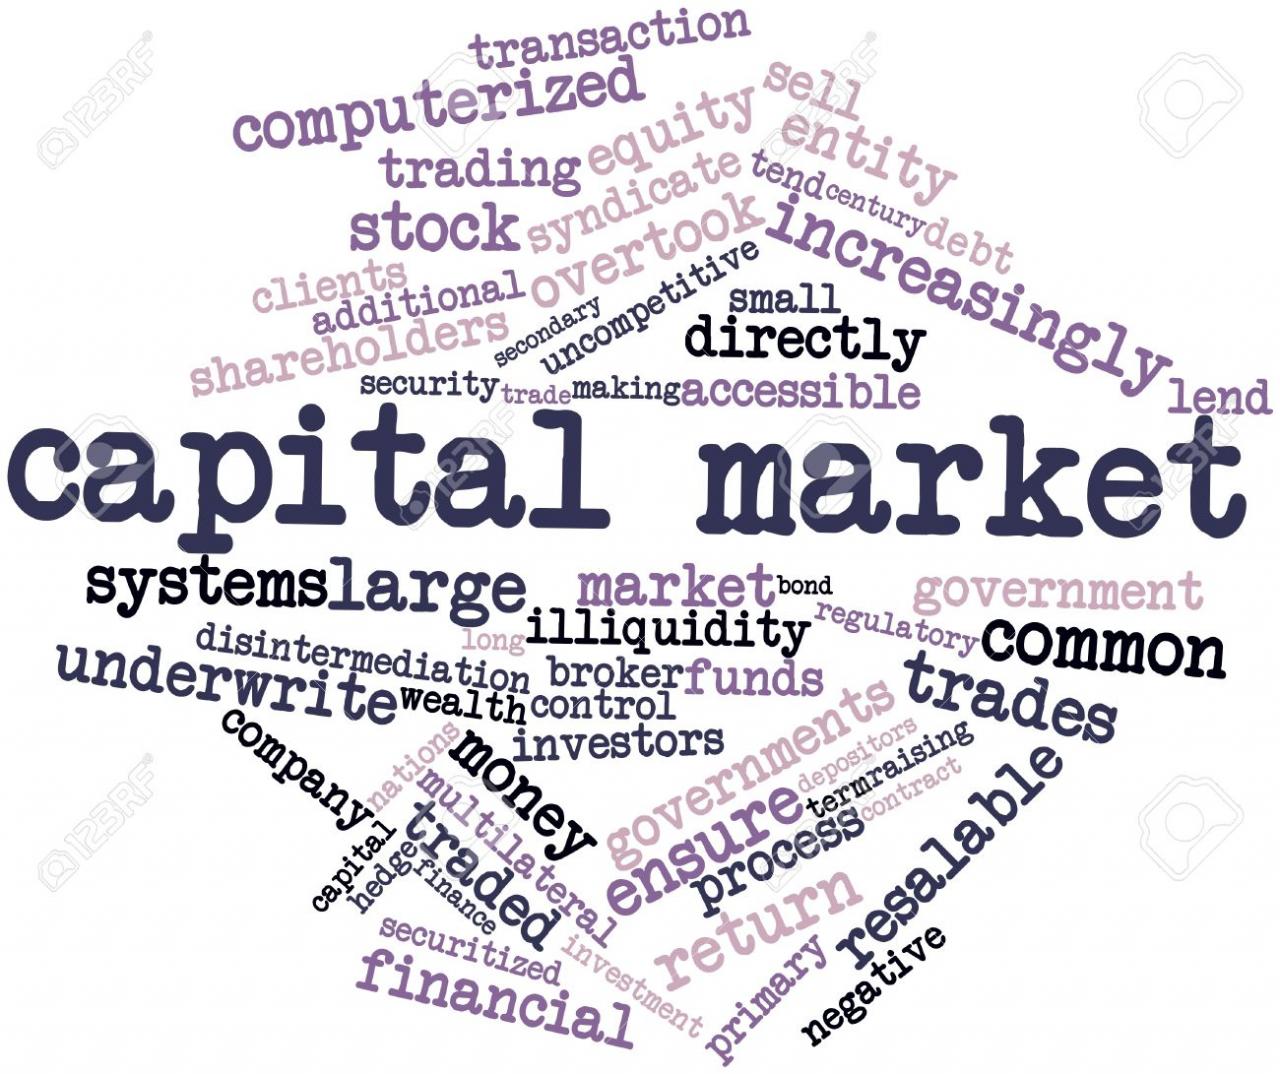 Non-interest finance products can deepen Nigeria's capital market